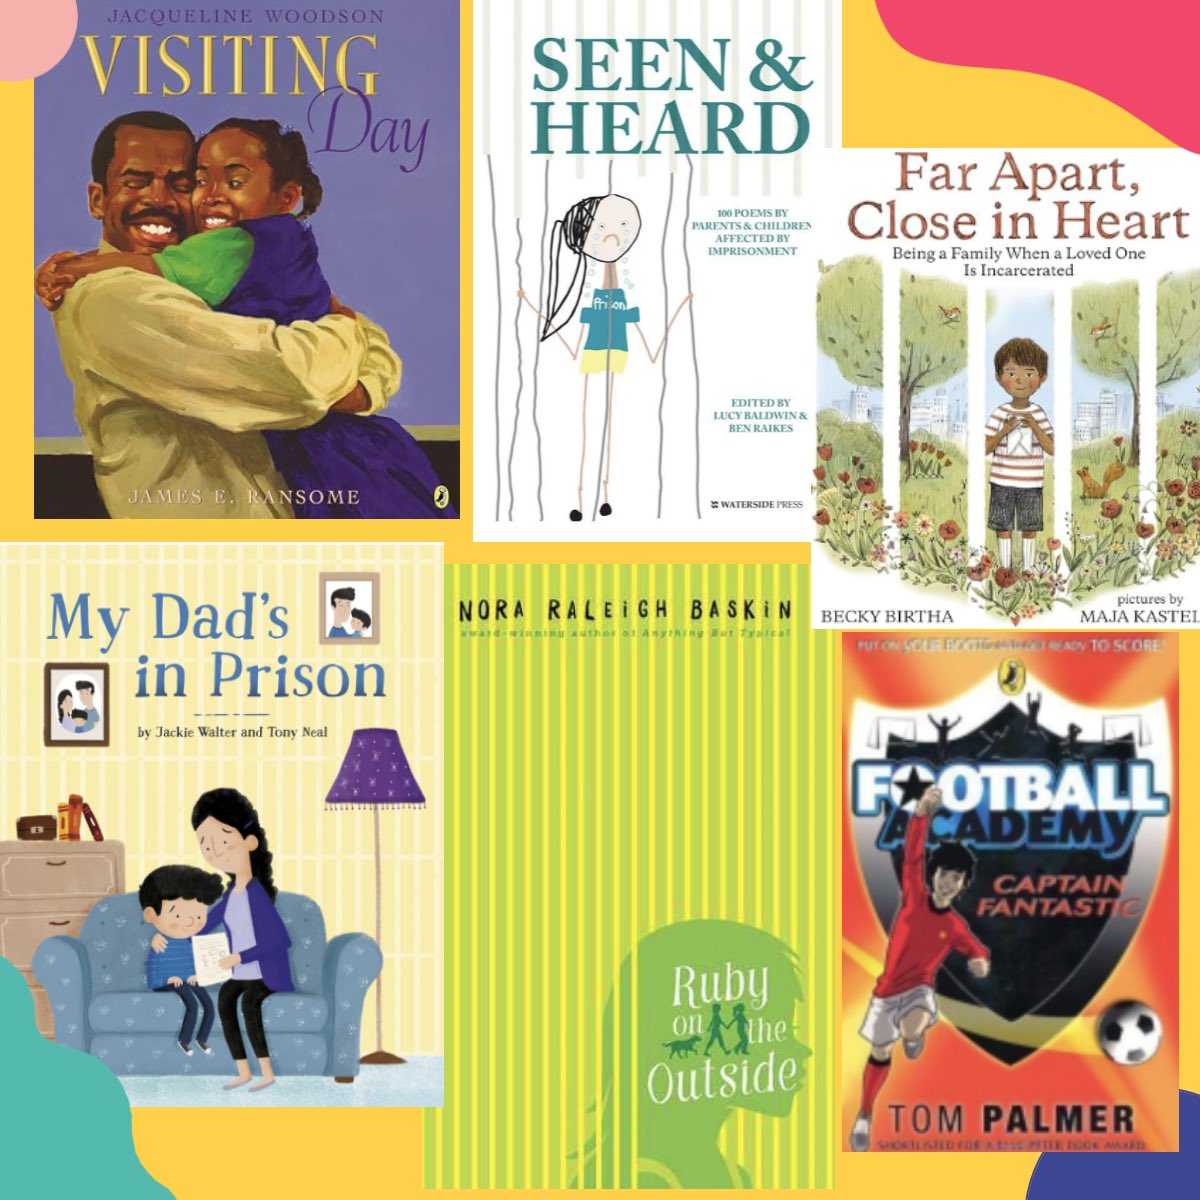 Today is International Children’s Book Day. It’s important for children to have books that represent their experiences #parentalimprisonment . Thank you @giveabookorg for your wonderful support over the years.